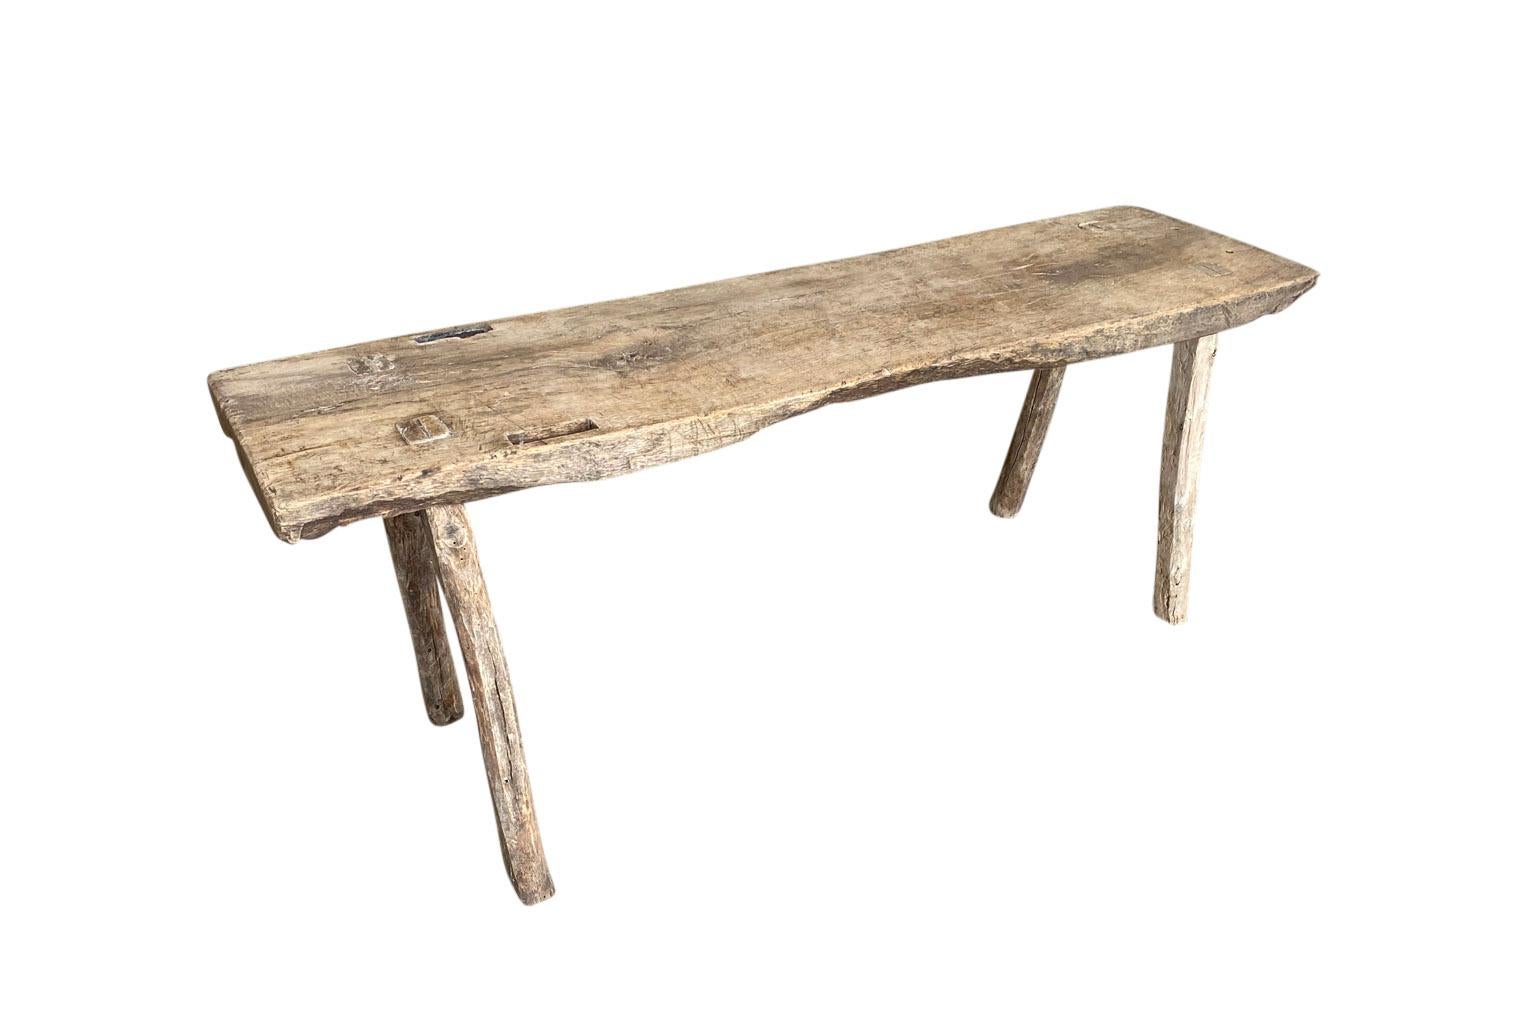 A terrific early 19th century rustic bench from the Catalan region of Spain. Soundly constructed from naturally washed chestnut. Super patina. Wonderful not only as a bench, but as a coffee table as well.